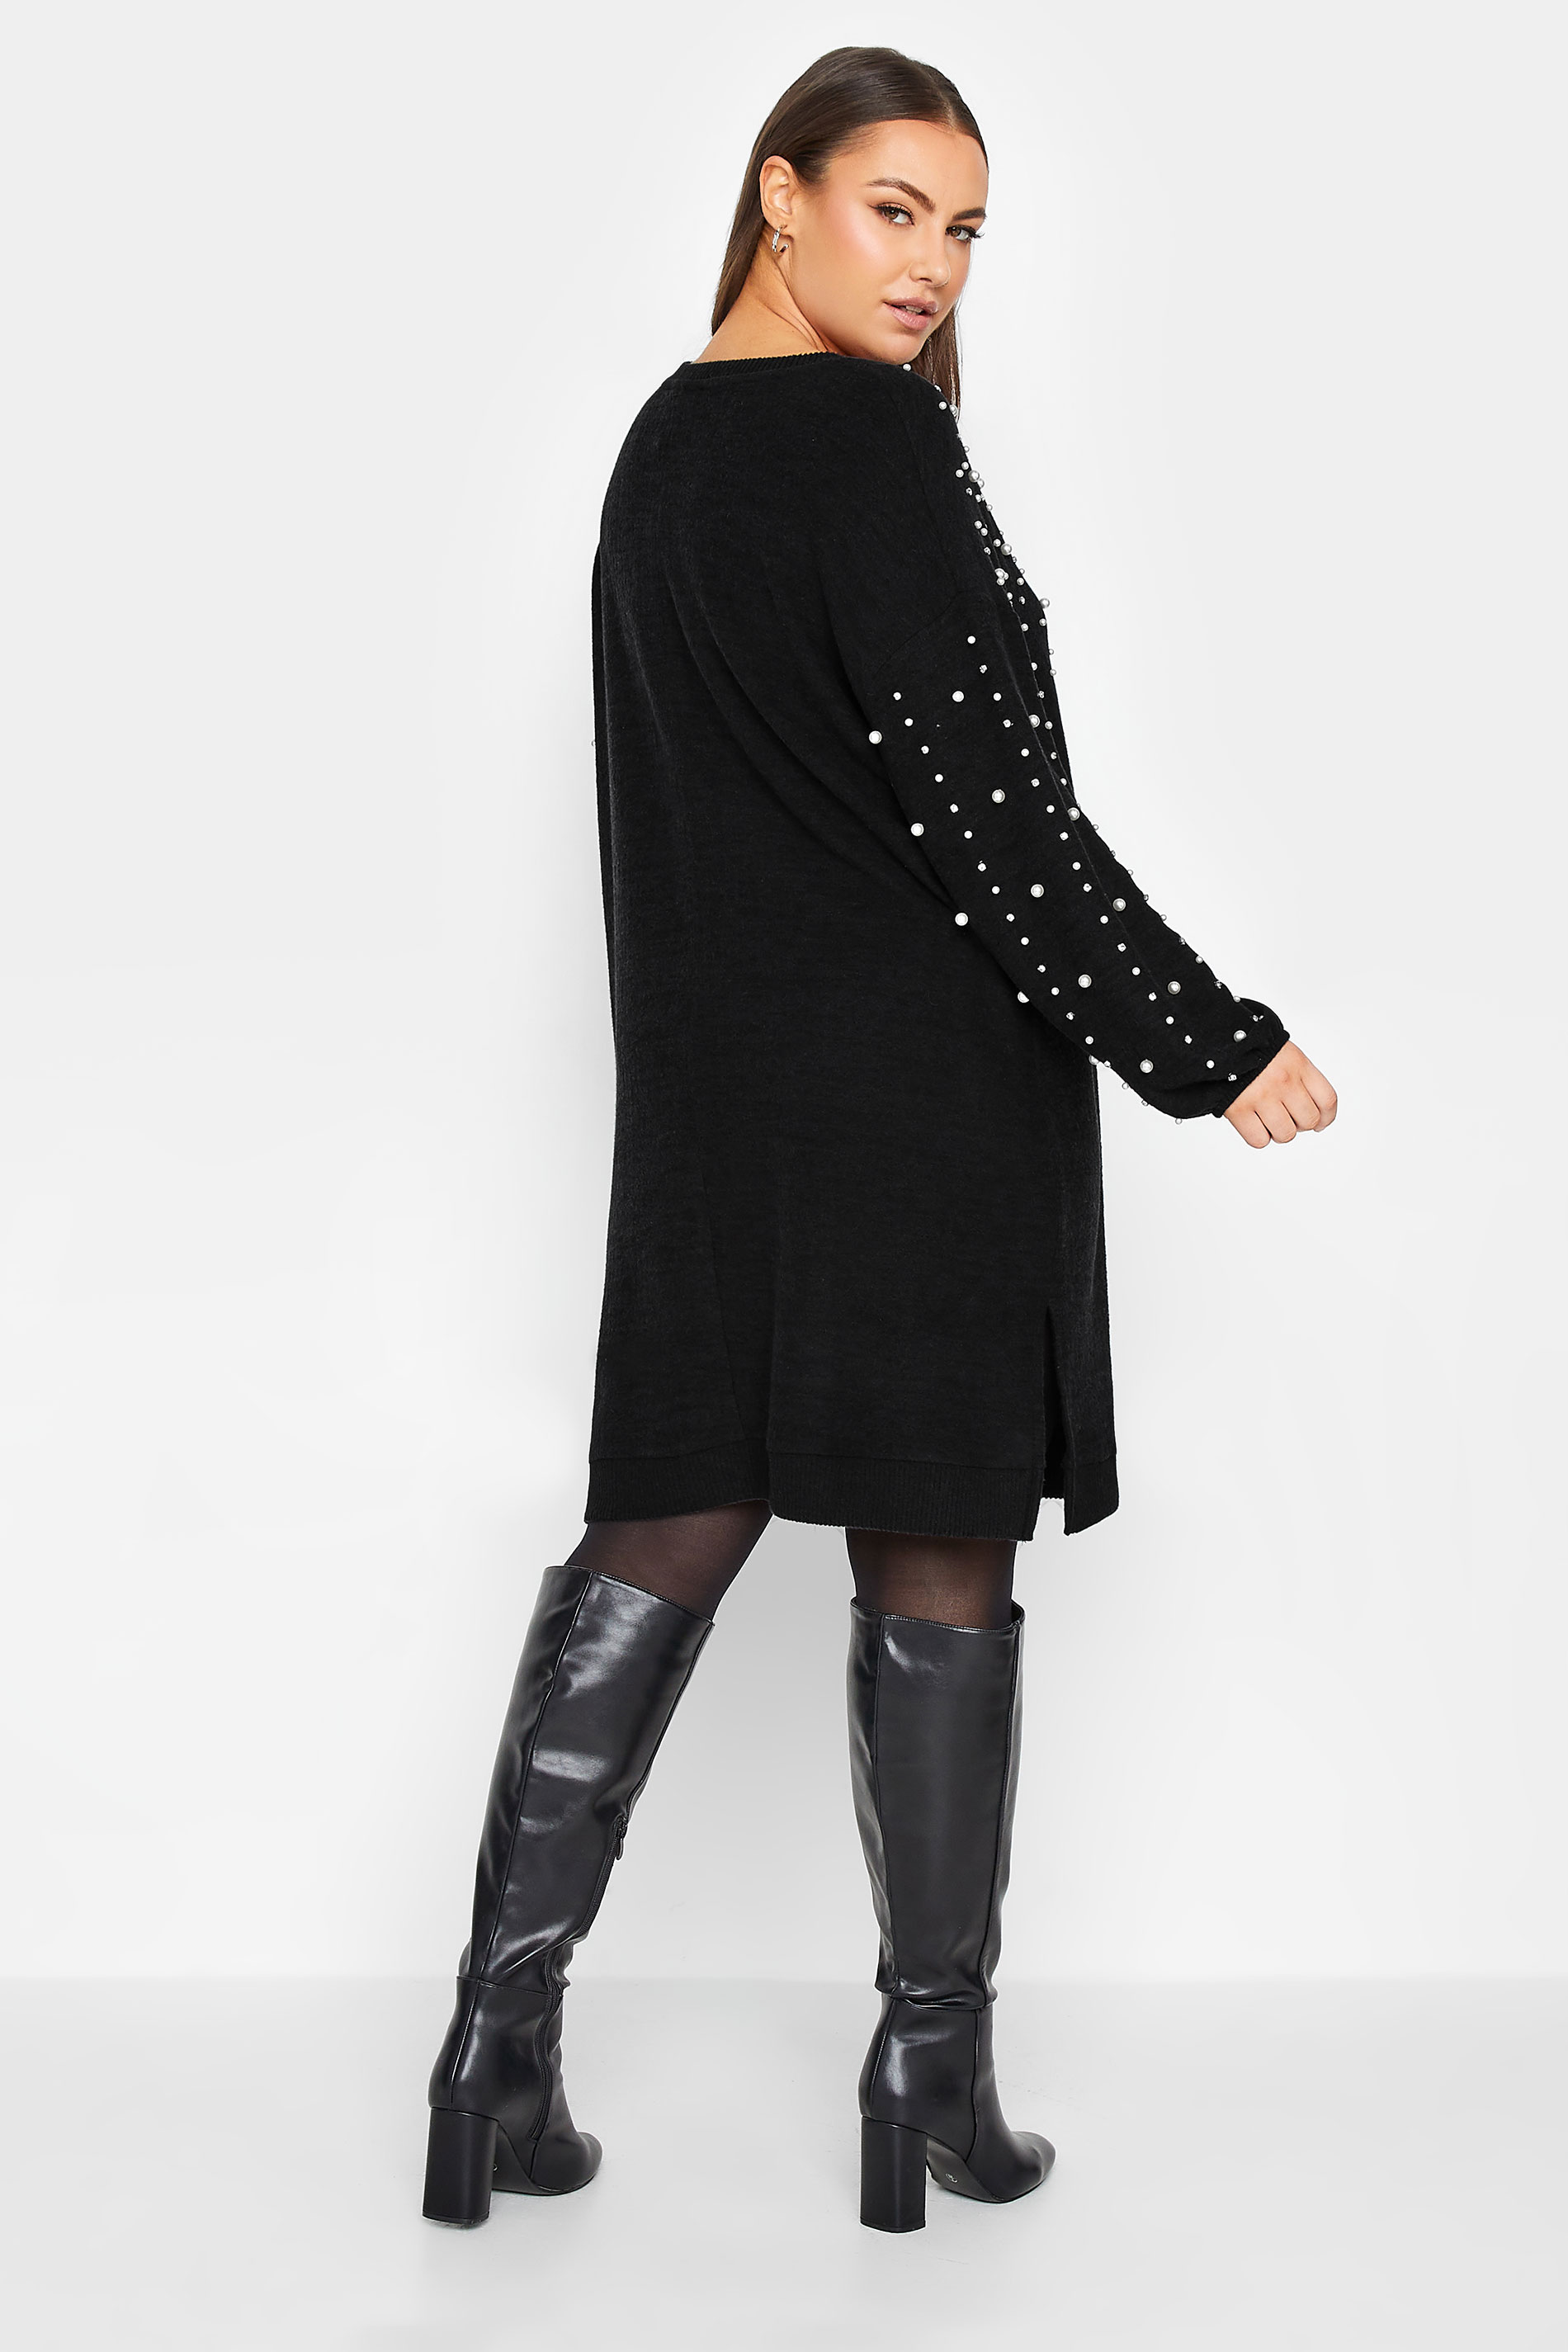 YOURS LUXURY Plus Size Black Soft Touch Embellished Jumper Dress | Yours Clothing 3